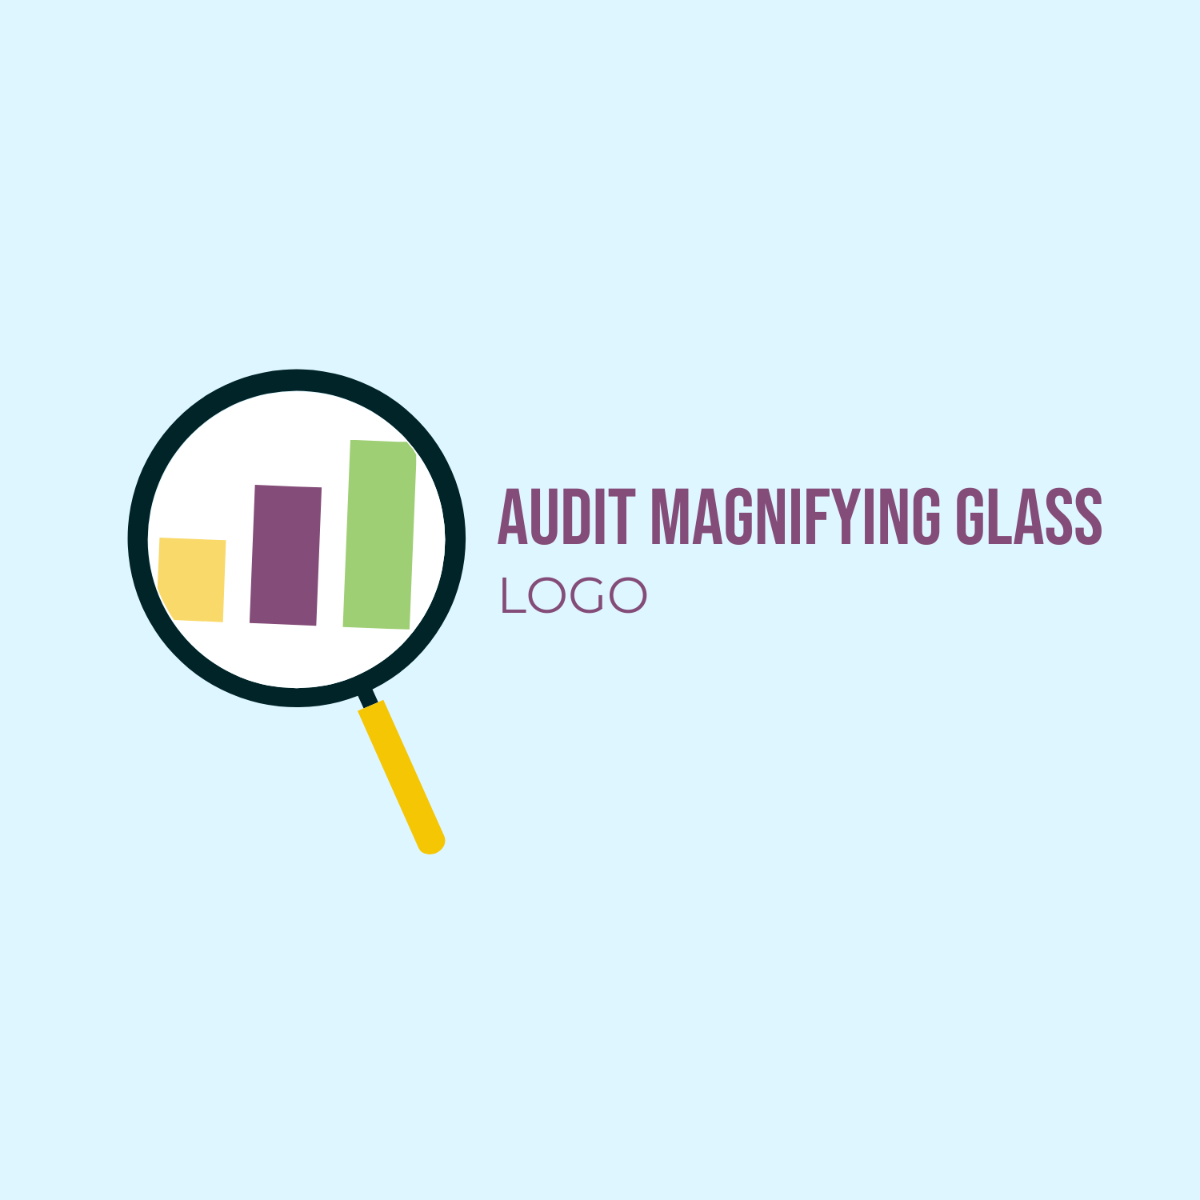 Audit Magnifying Glass Logo Template